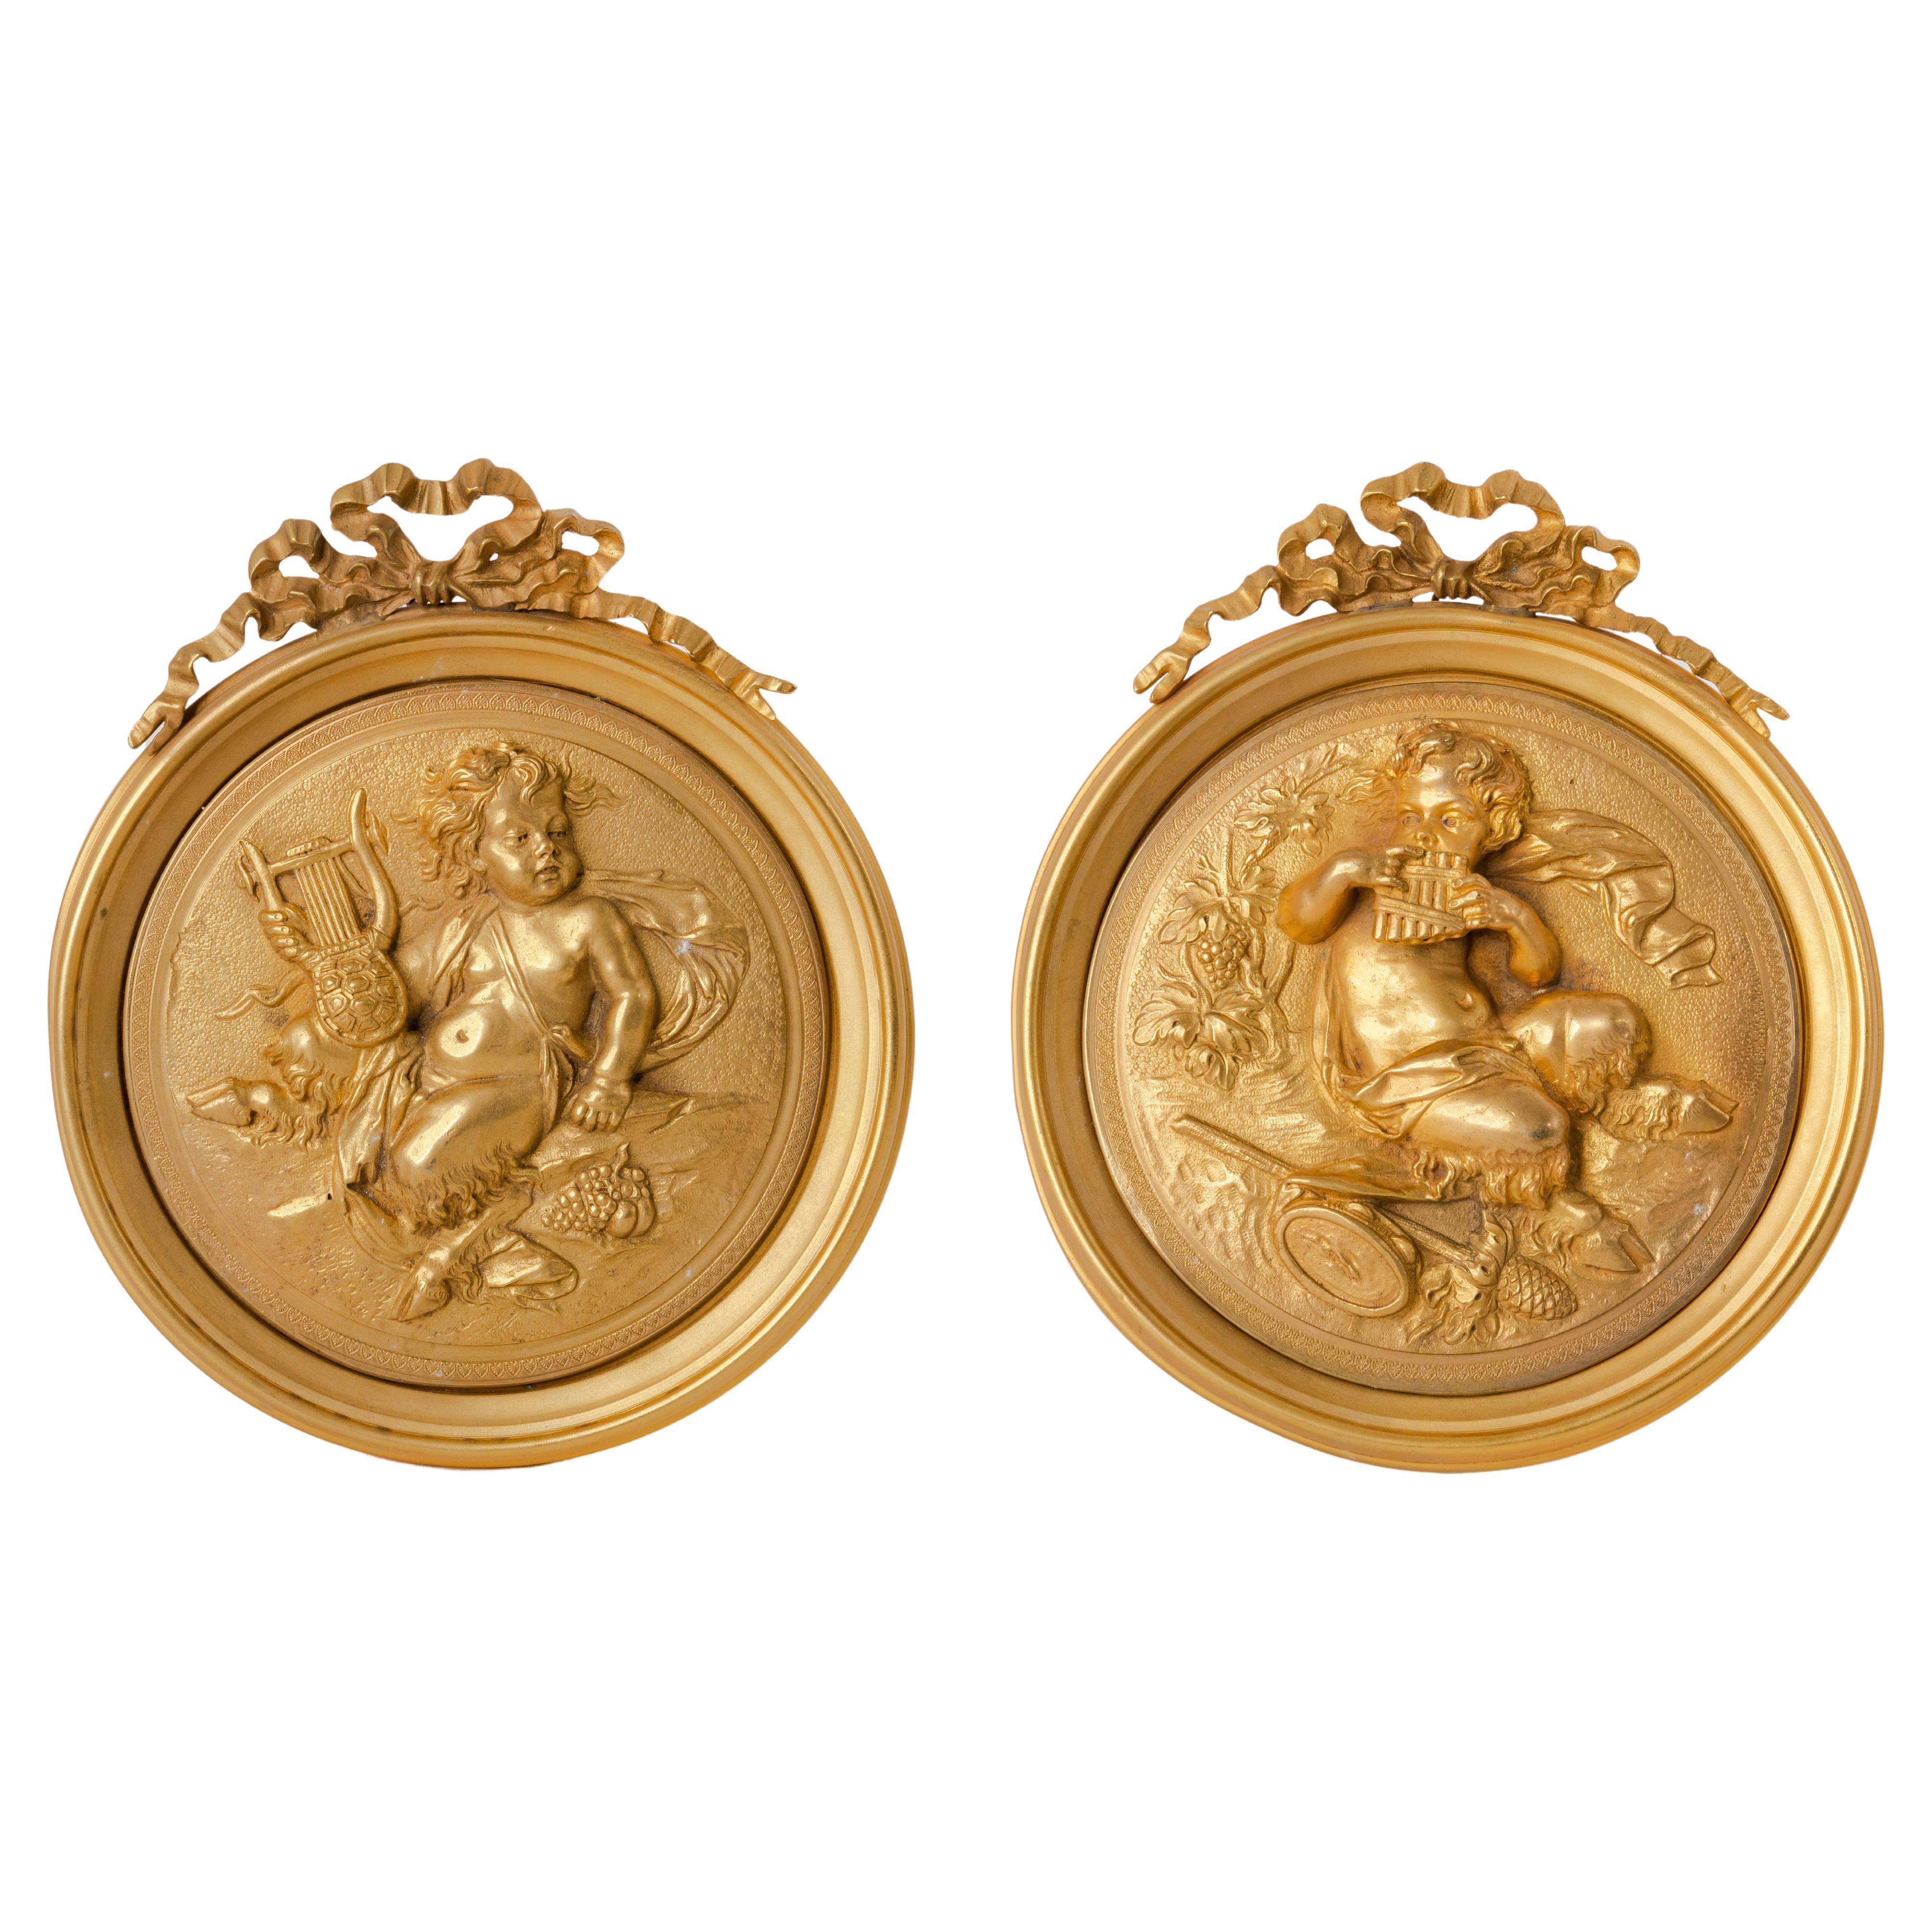 Pair of French Gilt Bronze Round Figural Wall Plaques, France, 19th Century For Sale